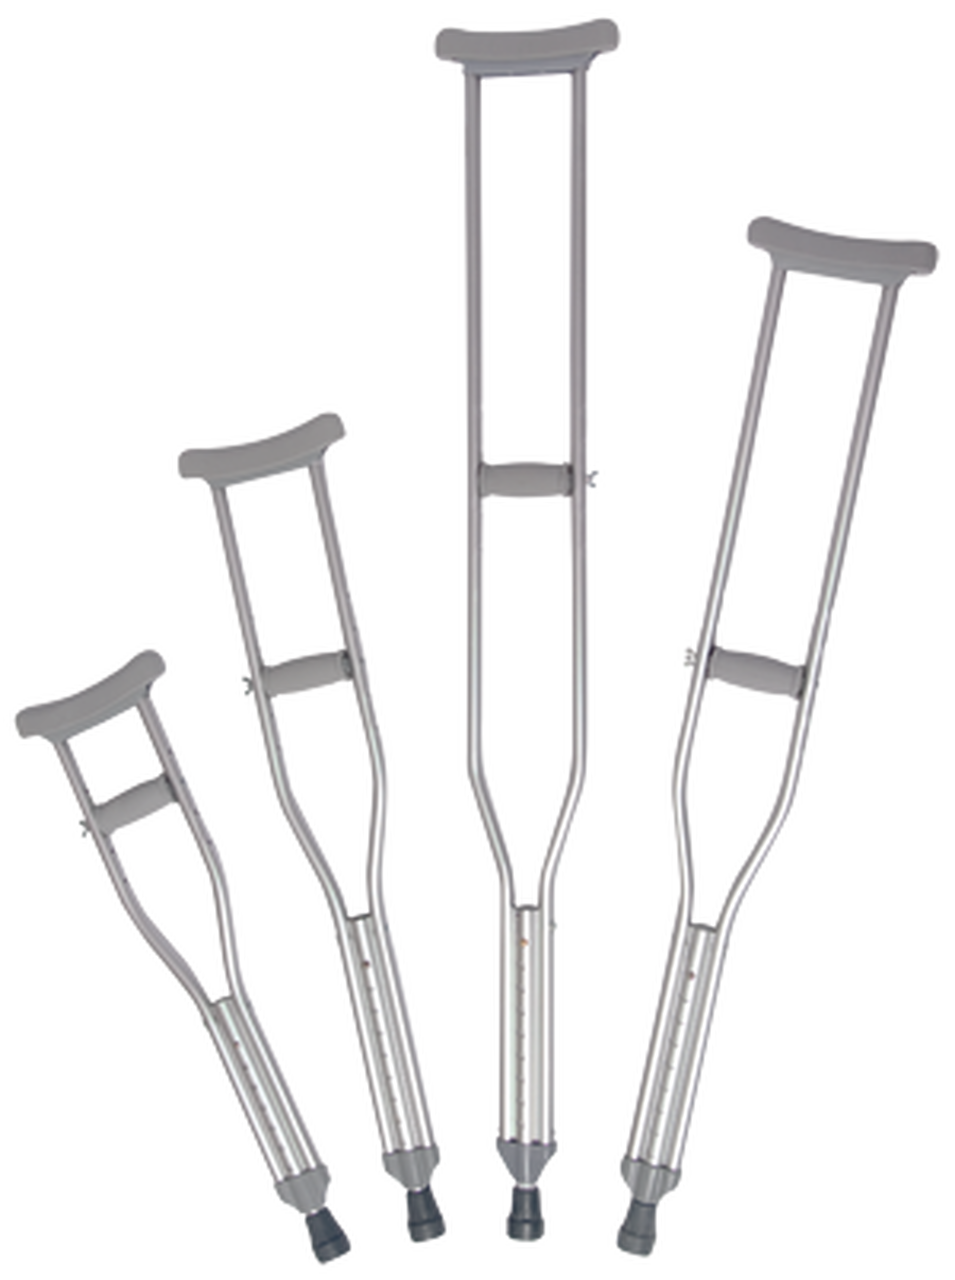 crutches of four different sizes